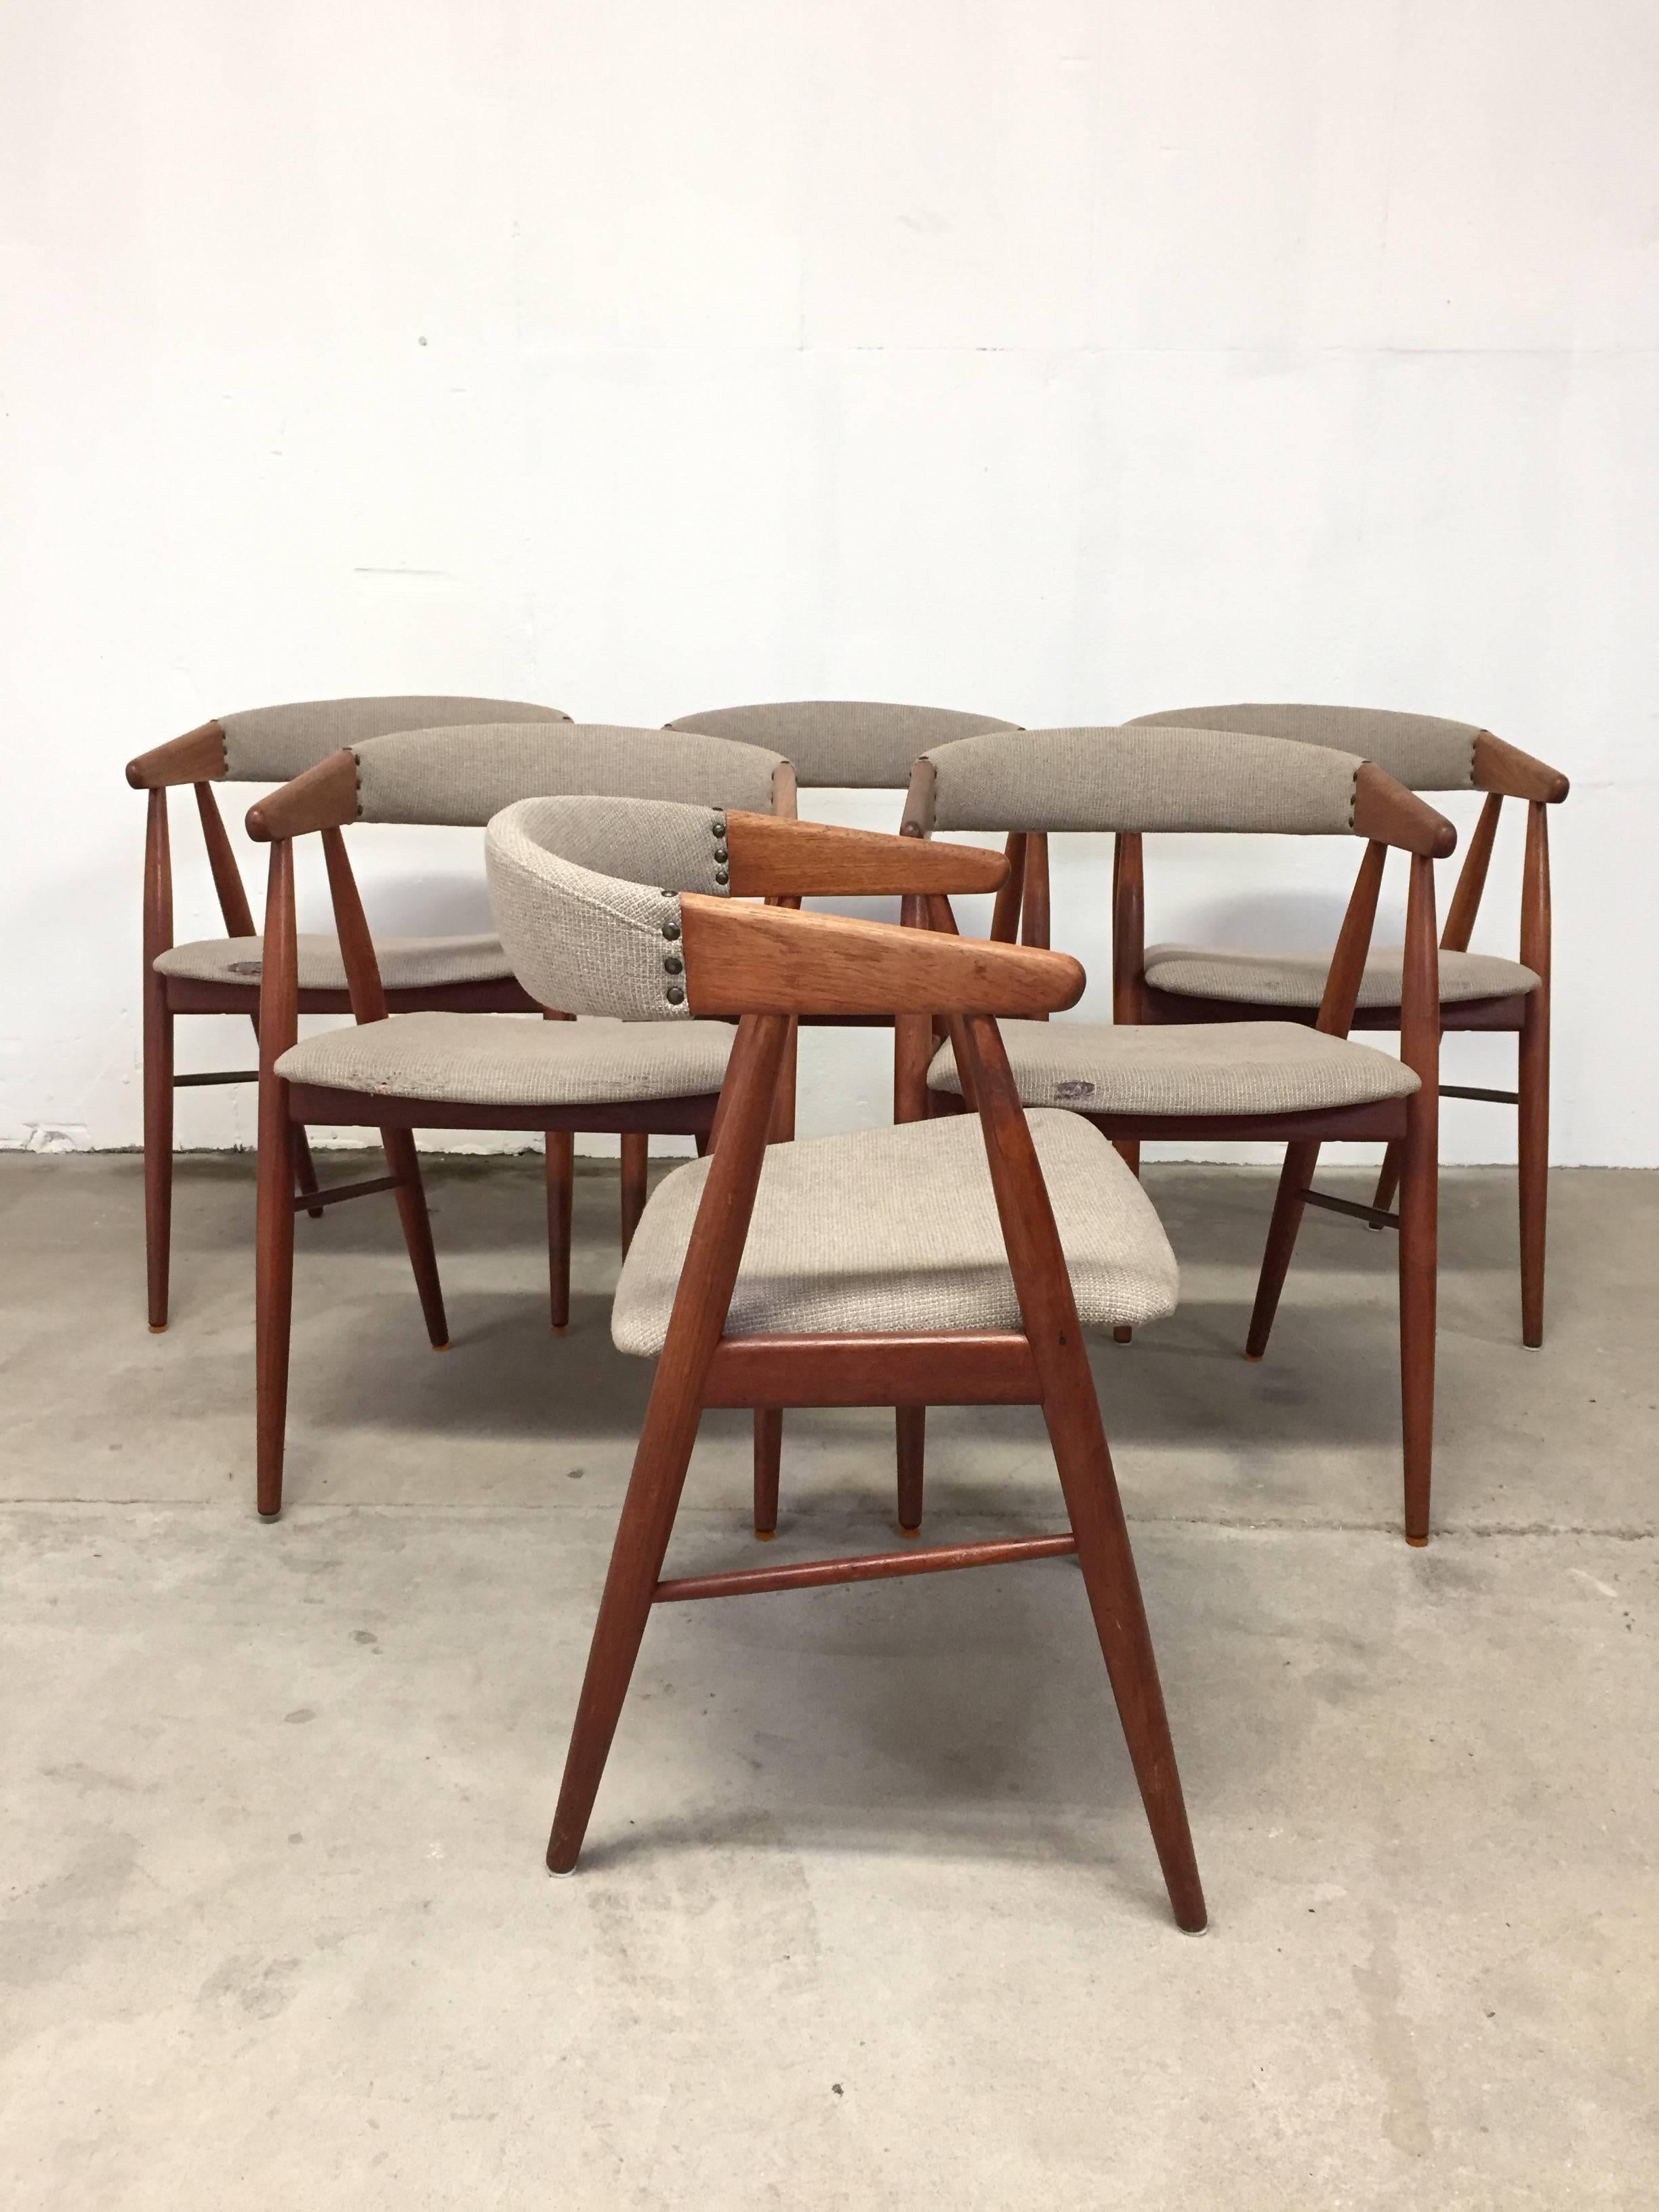 Armchairs designed by Kai Kristiansen in solid teak very beautiful and comfortable. 

Kai Kristiansen's designs have become some of the most well-known pieces to be created in the mid part of the 20th century and his name has become synonymous